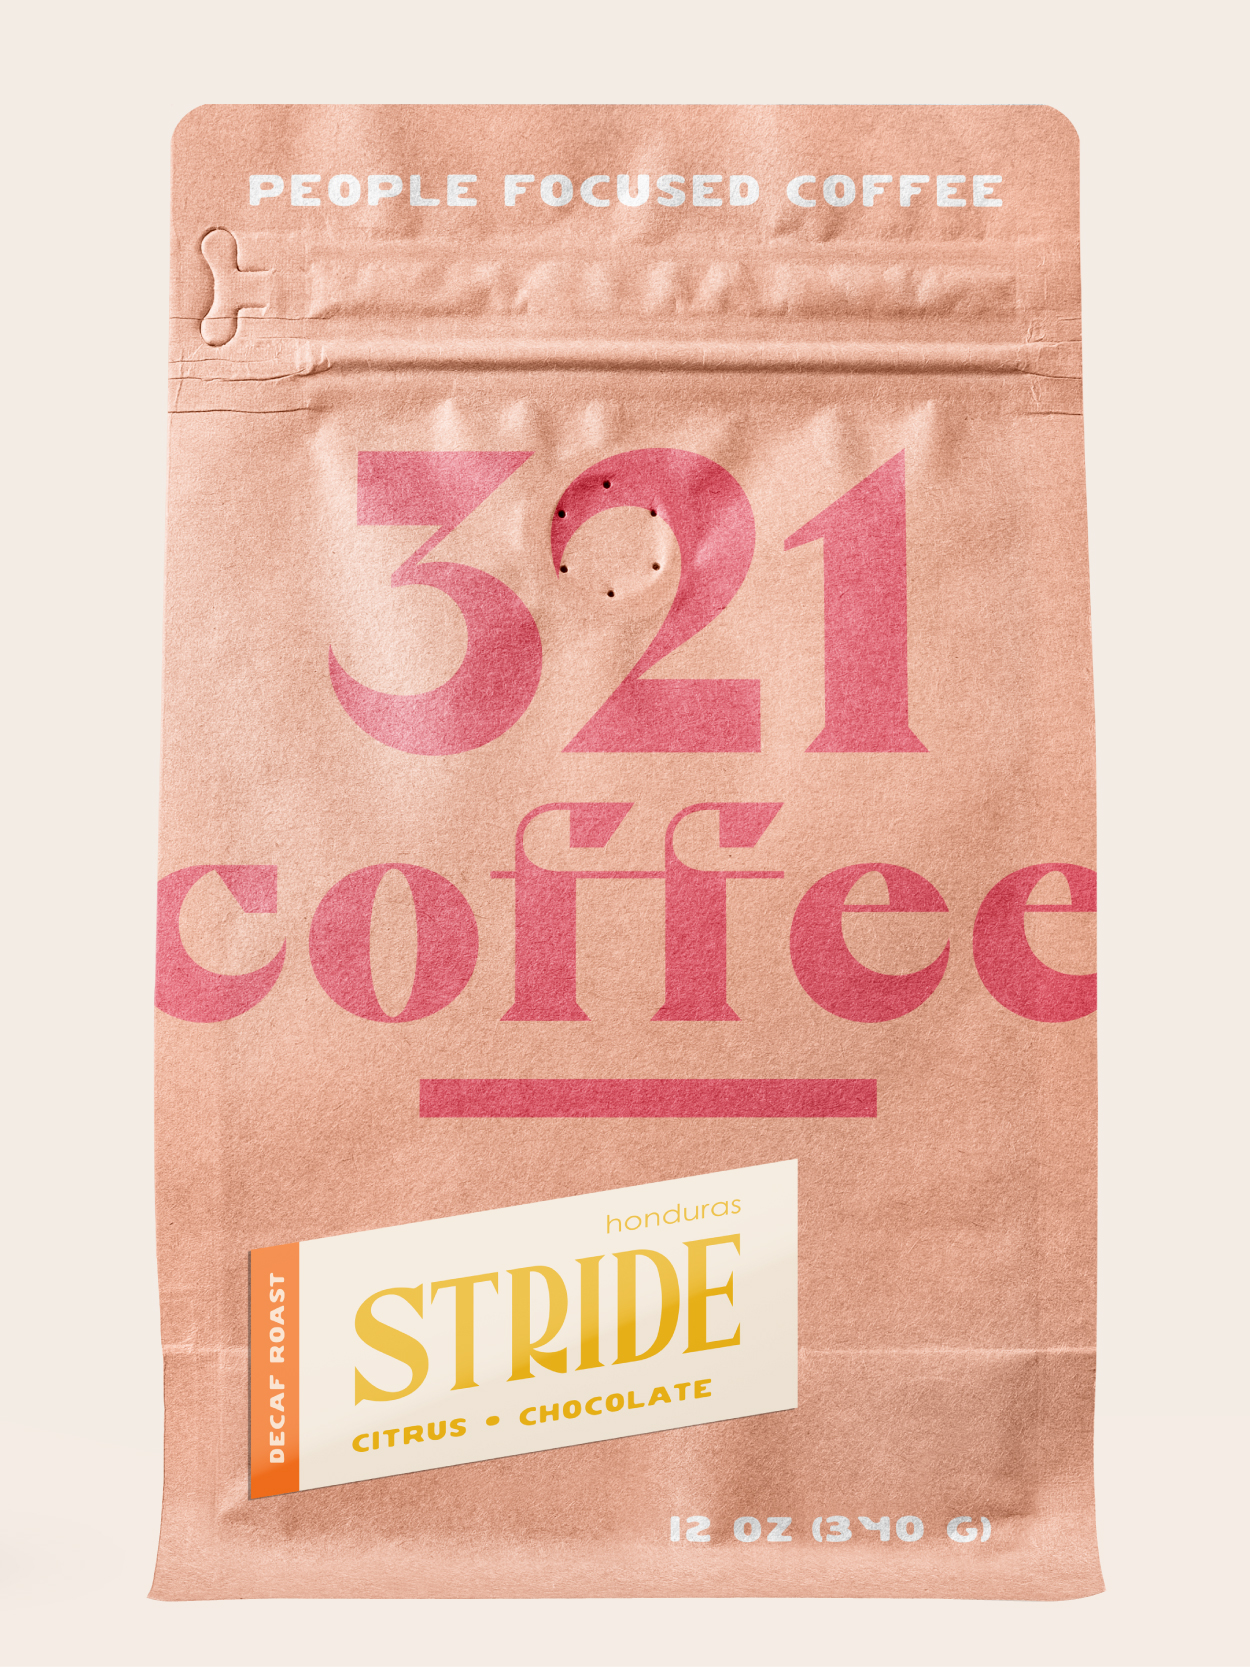 An image of 321's Stride coffee. When hovered over, the text Stride Decaf Roast, Citrus and Cocoa, Honduras, appears above the bag.